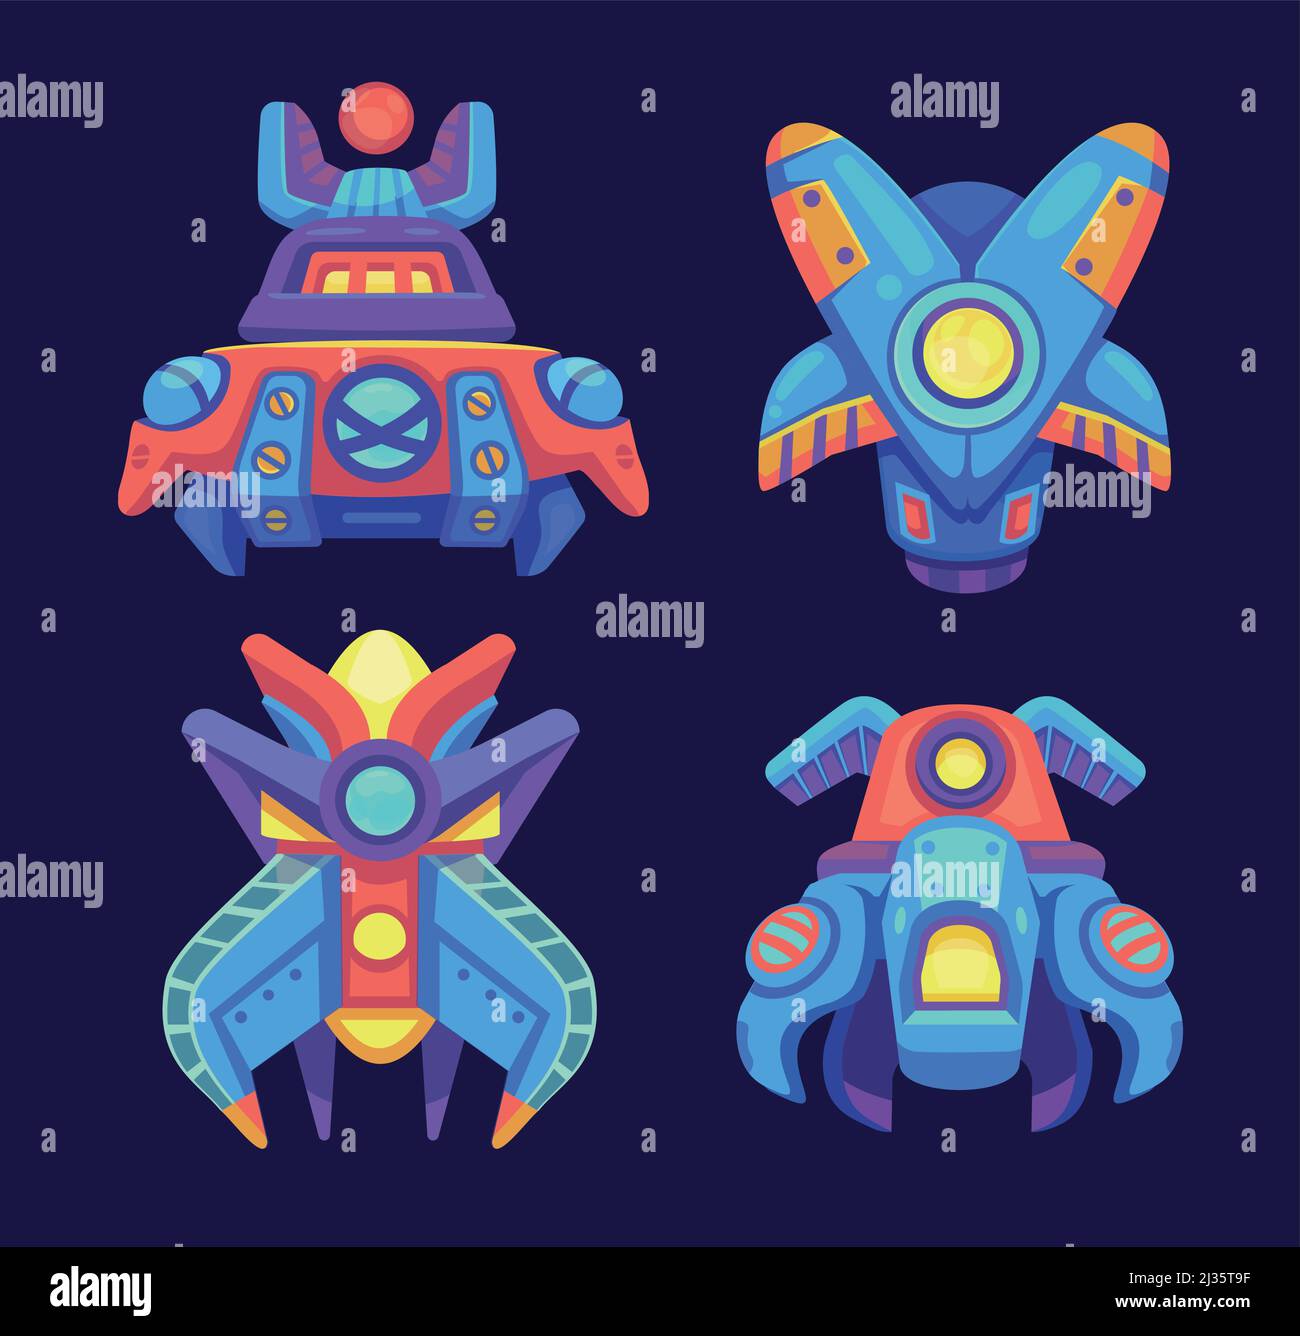 Alien space ships, ufo rockets, fantasy bizarre shuttles, computer game graphic design elements, cosmic collection of funny spaceships isolated on blu Stock Vector